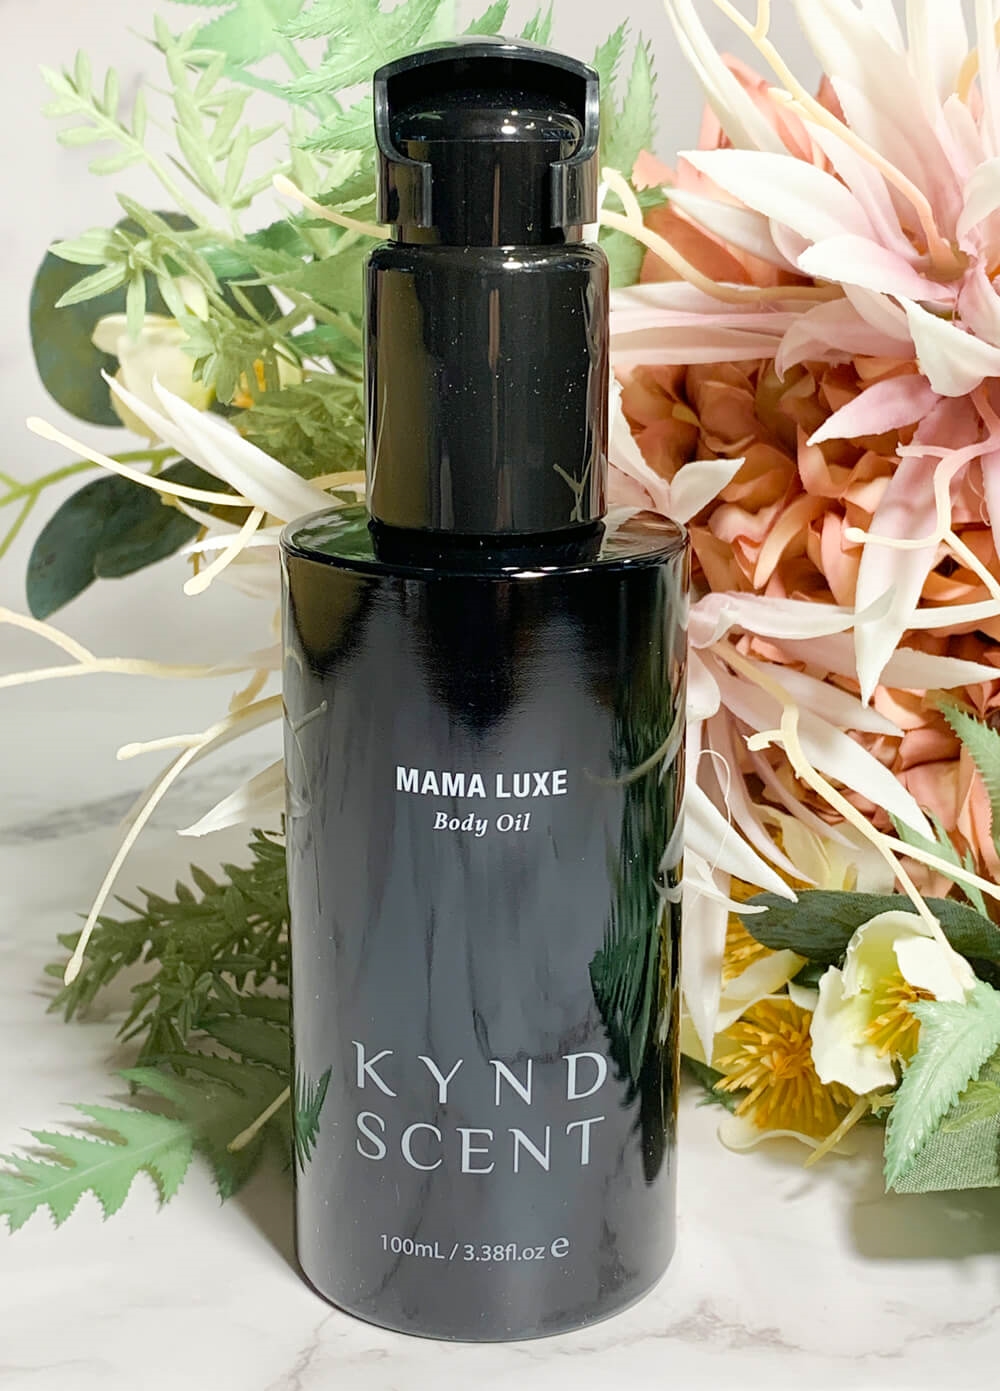 Kynd Scent - Mama Luxe Body Oil | Queen Bee